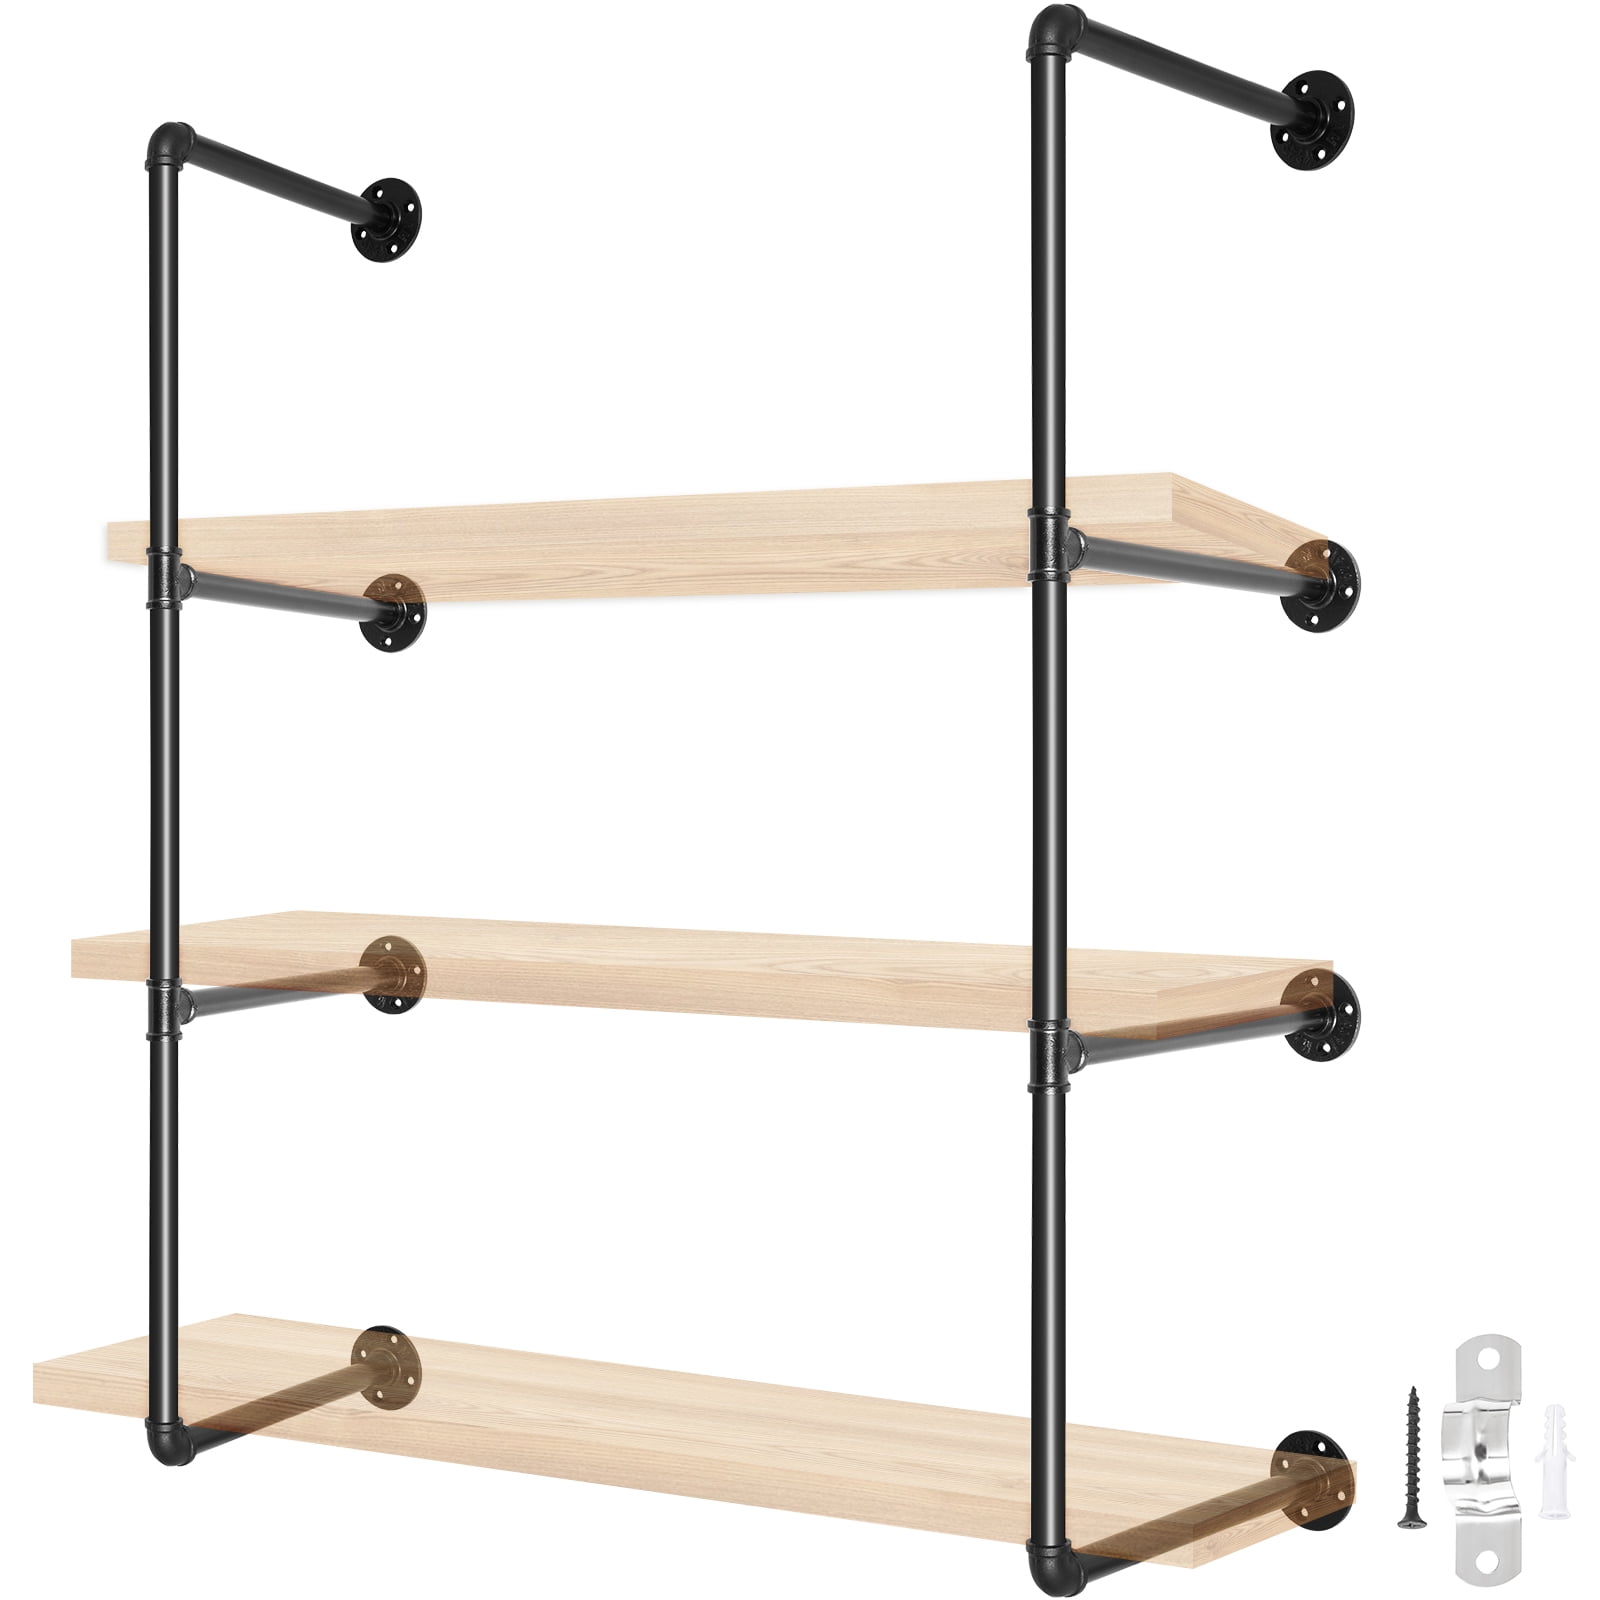 Jaxpety 3 Tier Industrial Retro Wall Mount Iron Pipe Shelves